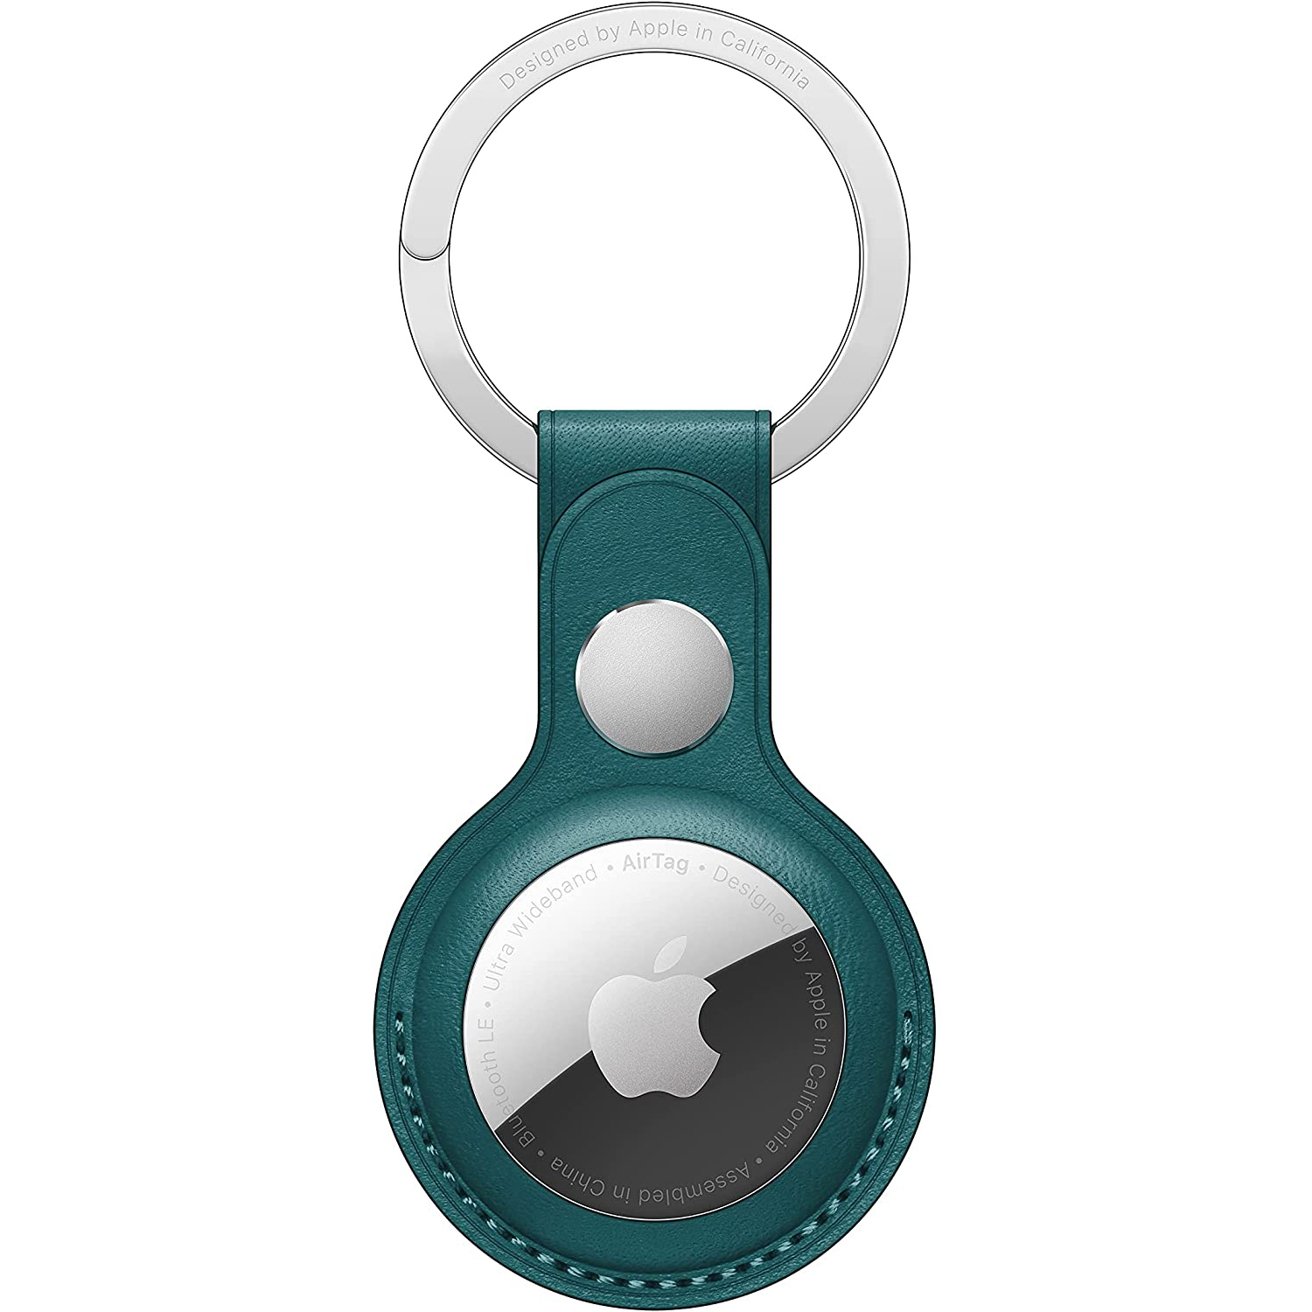 Apple's simple keychain is great for those who just want to attach an AirTag to their keys.